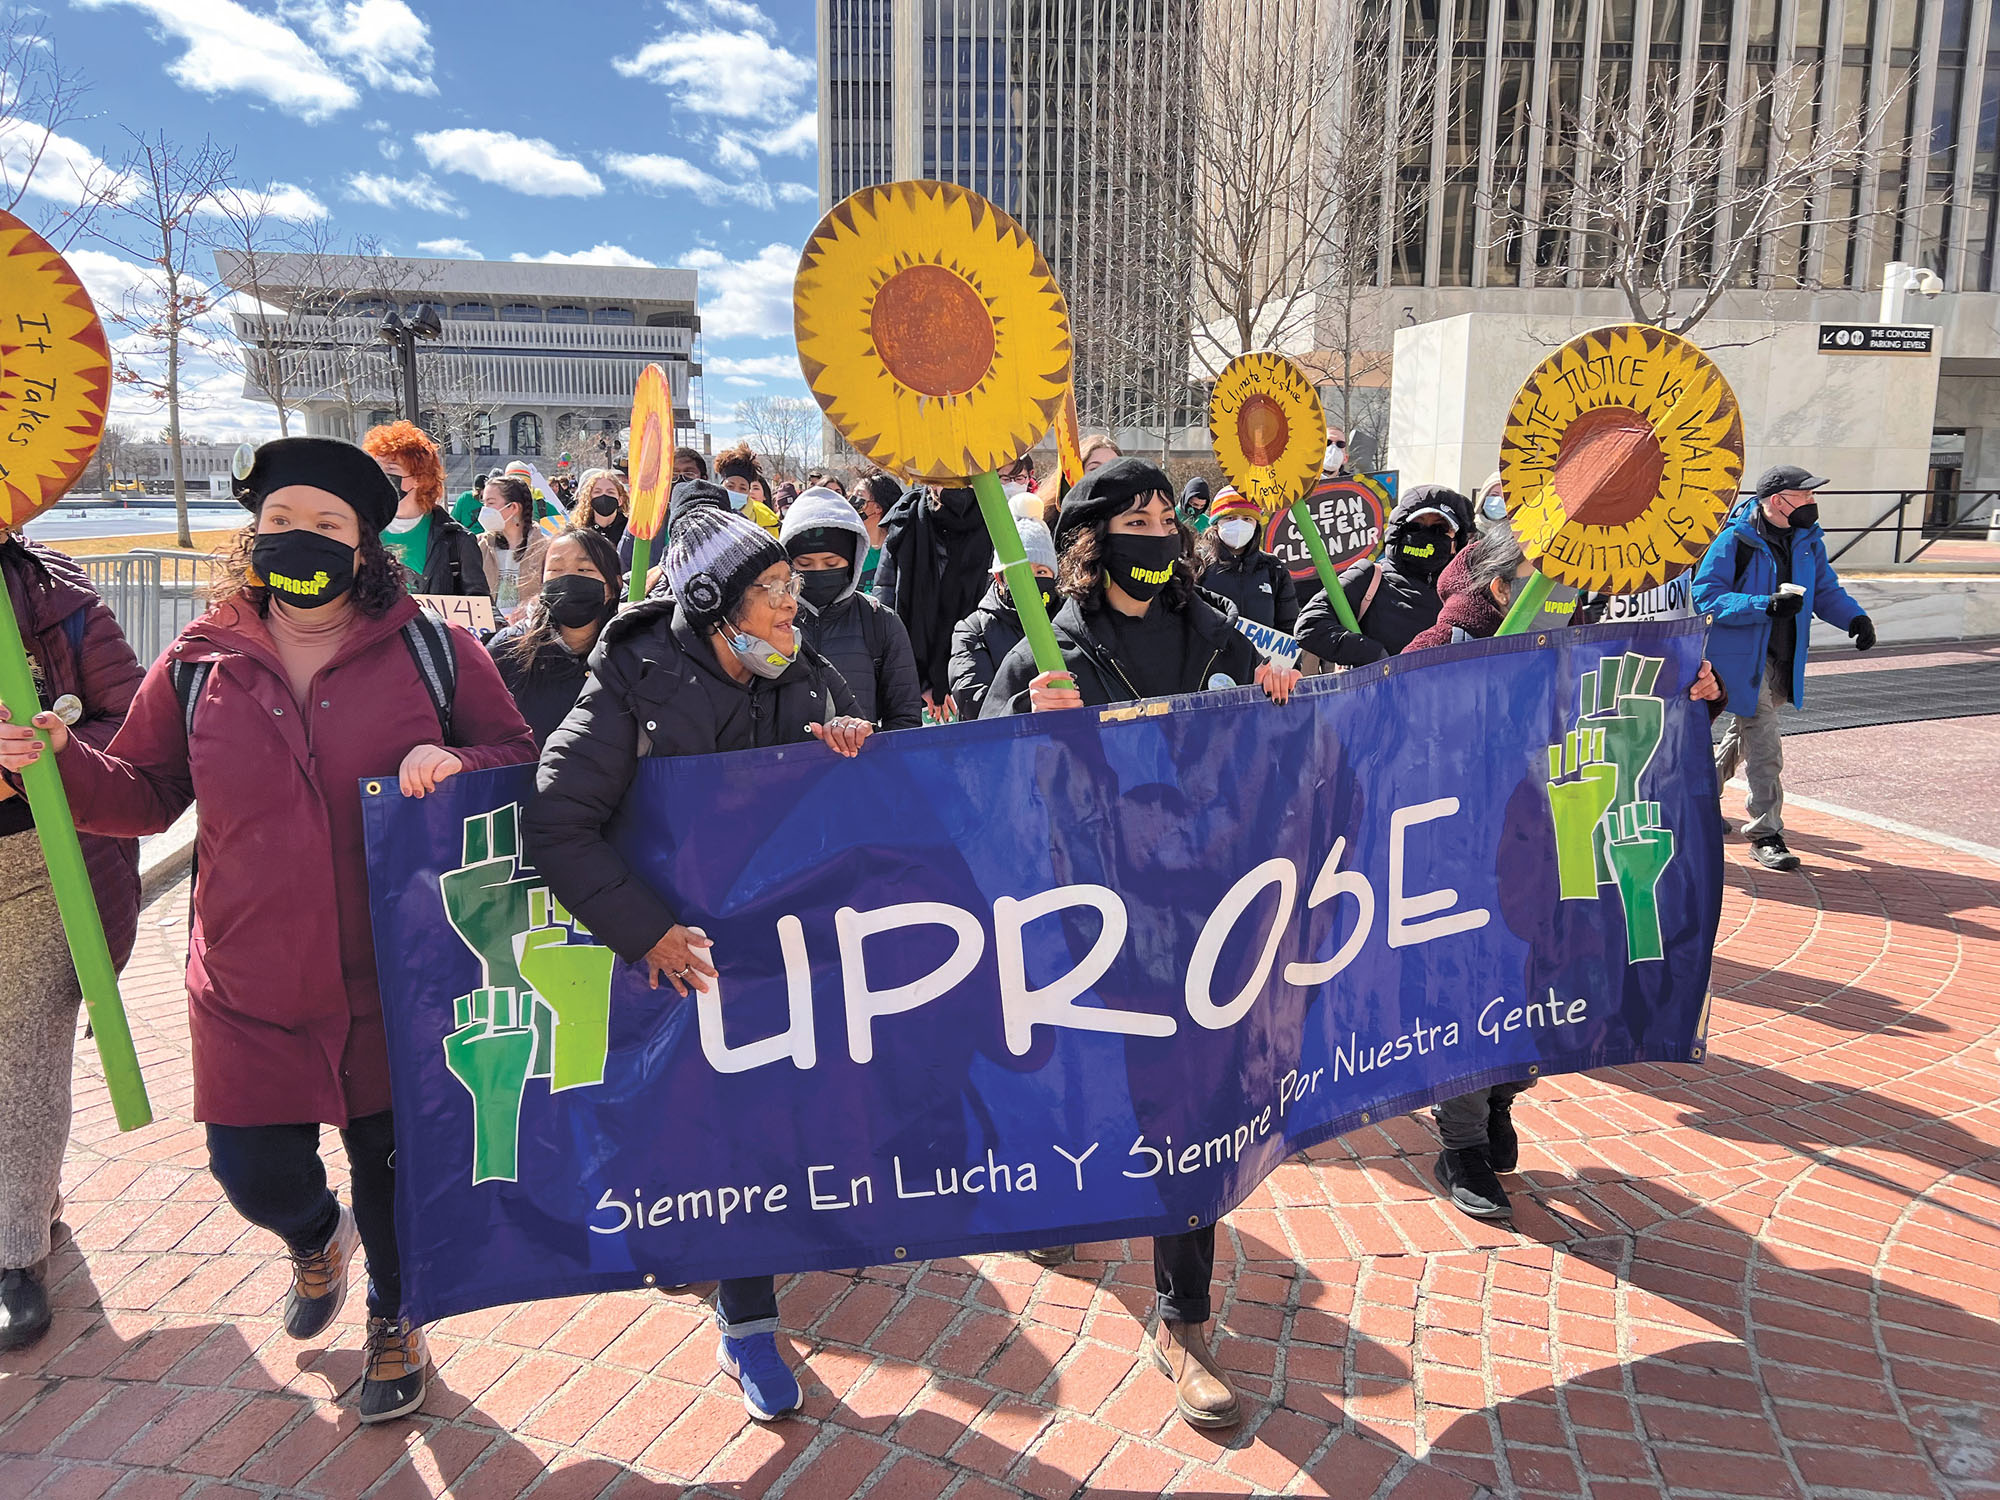 Climate justice protesters carrying a sign that reads "Uprose," a group that fights for community solar energy